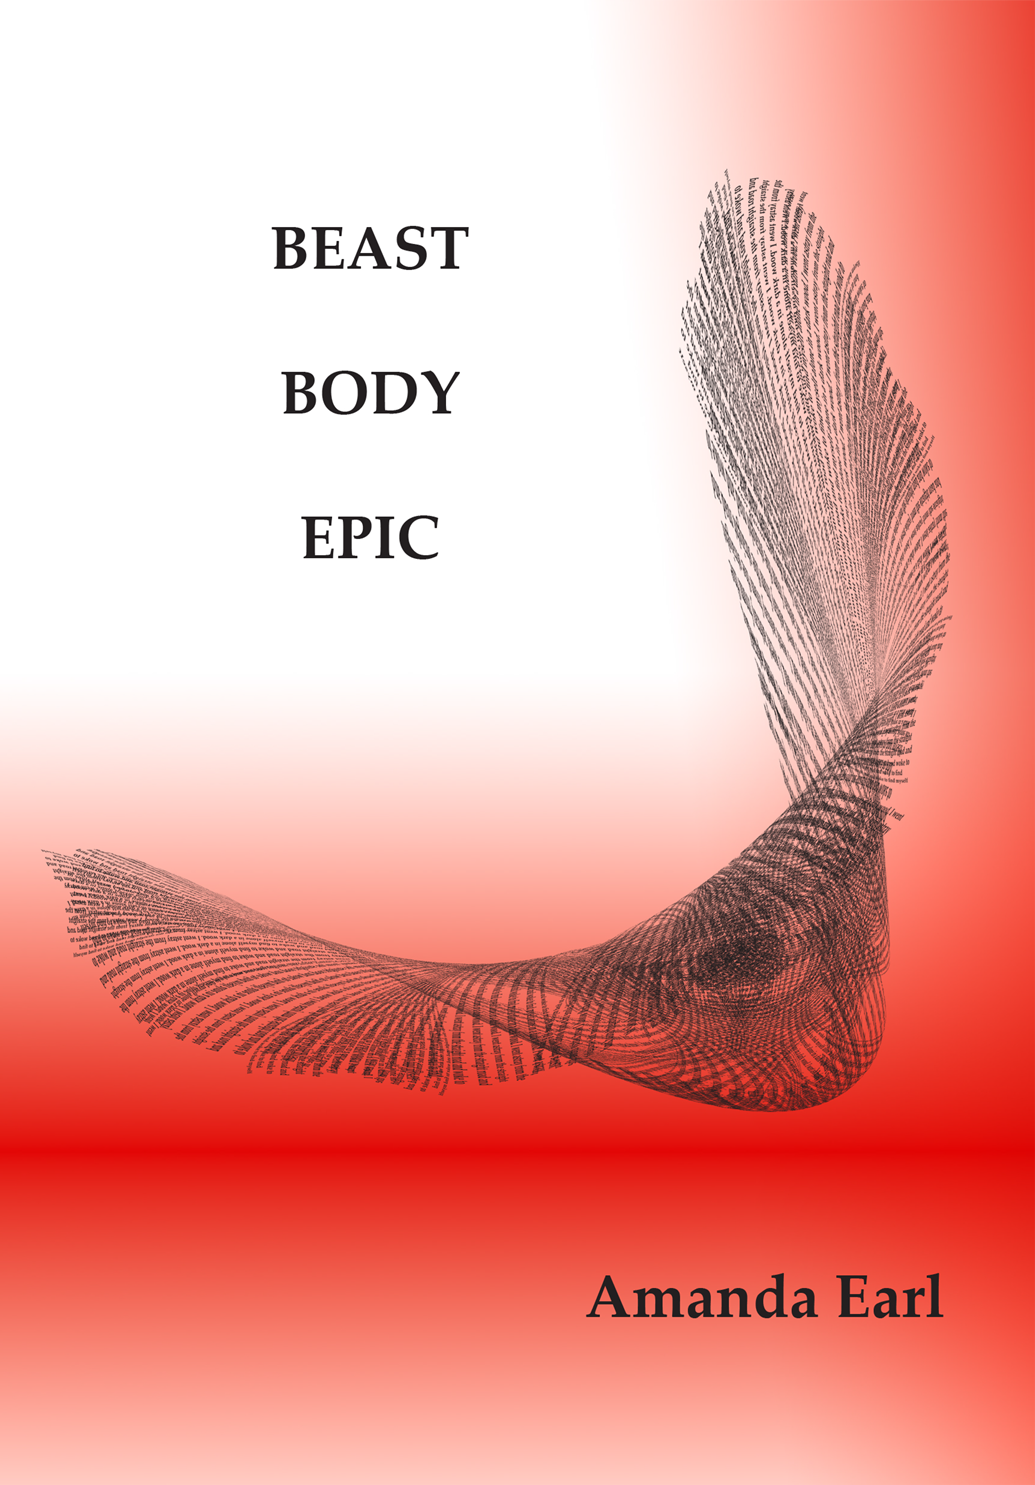 book cover with white and red background and visual poem. Text: Beast Body Epic/Amanda Earl